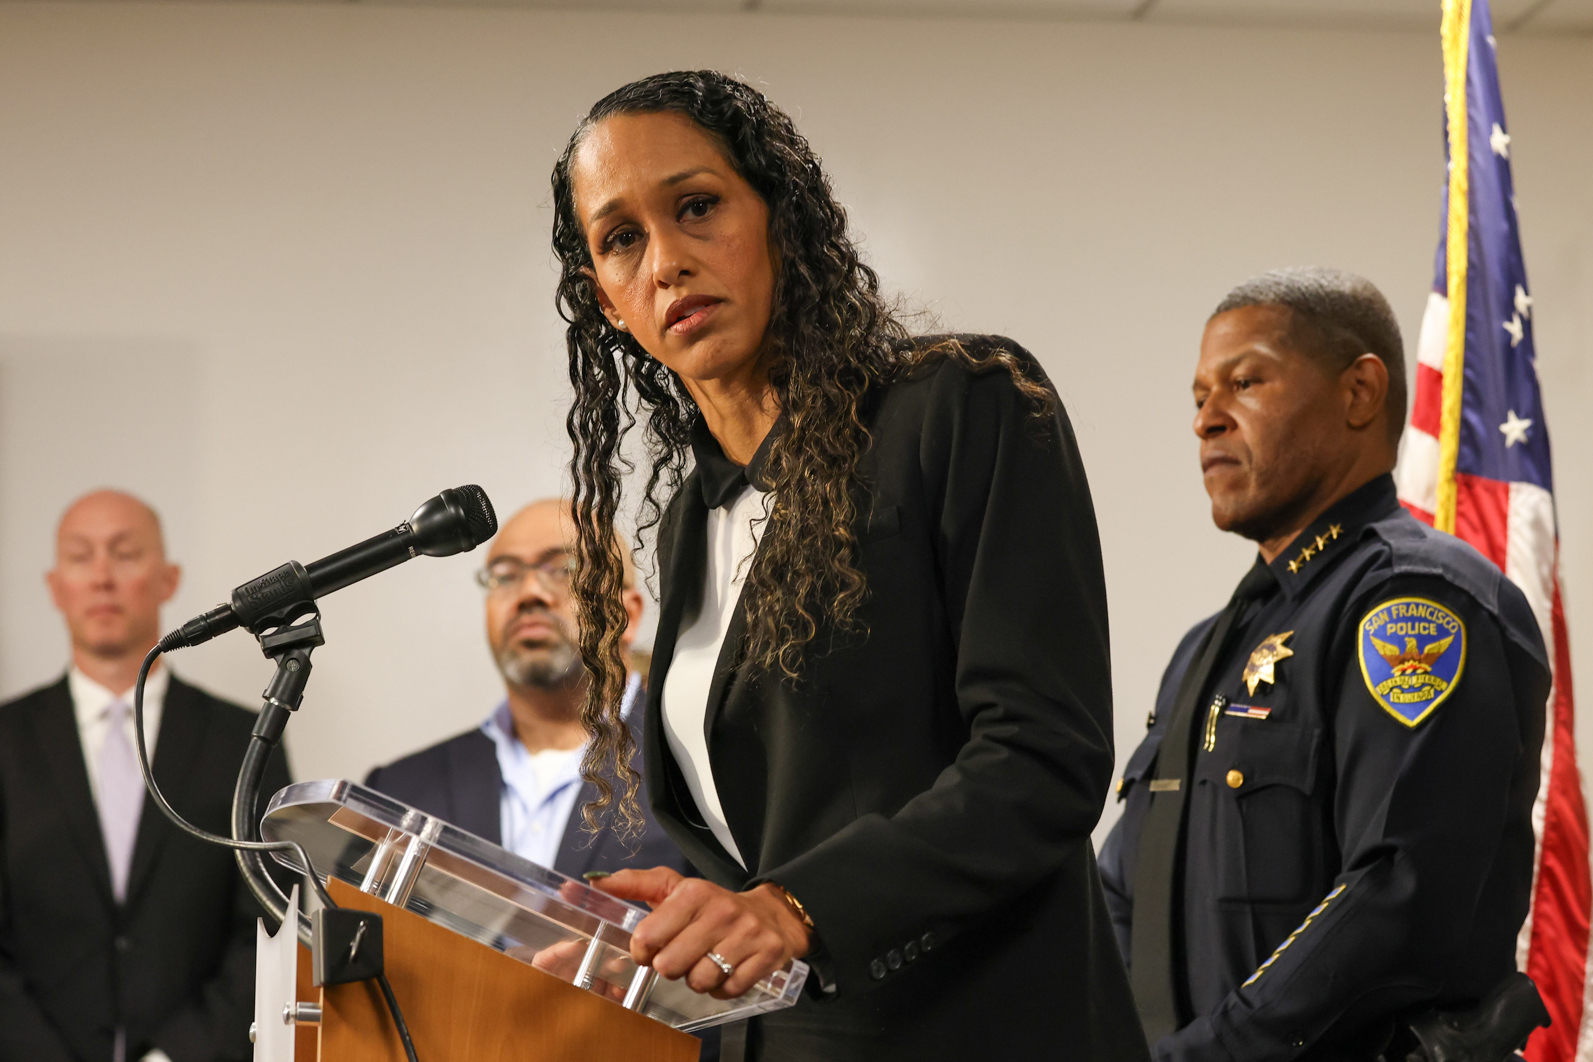 New details raise questions about why DA dropped case against SF cop